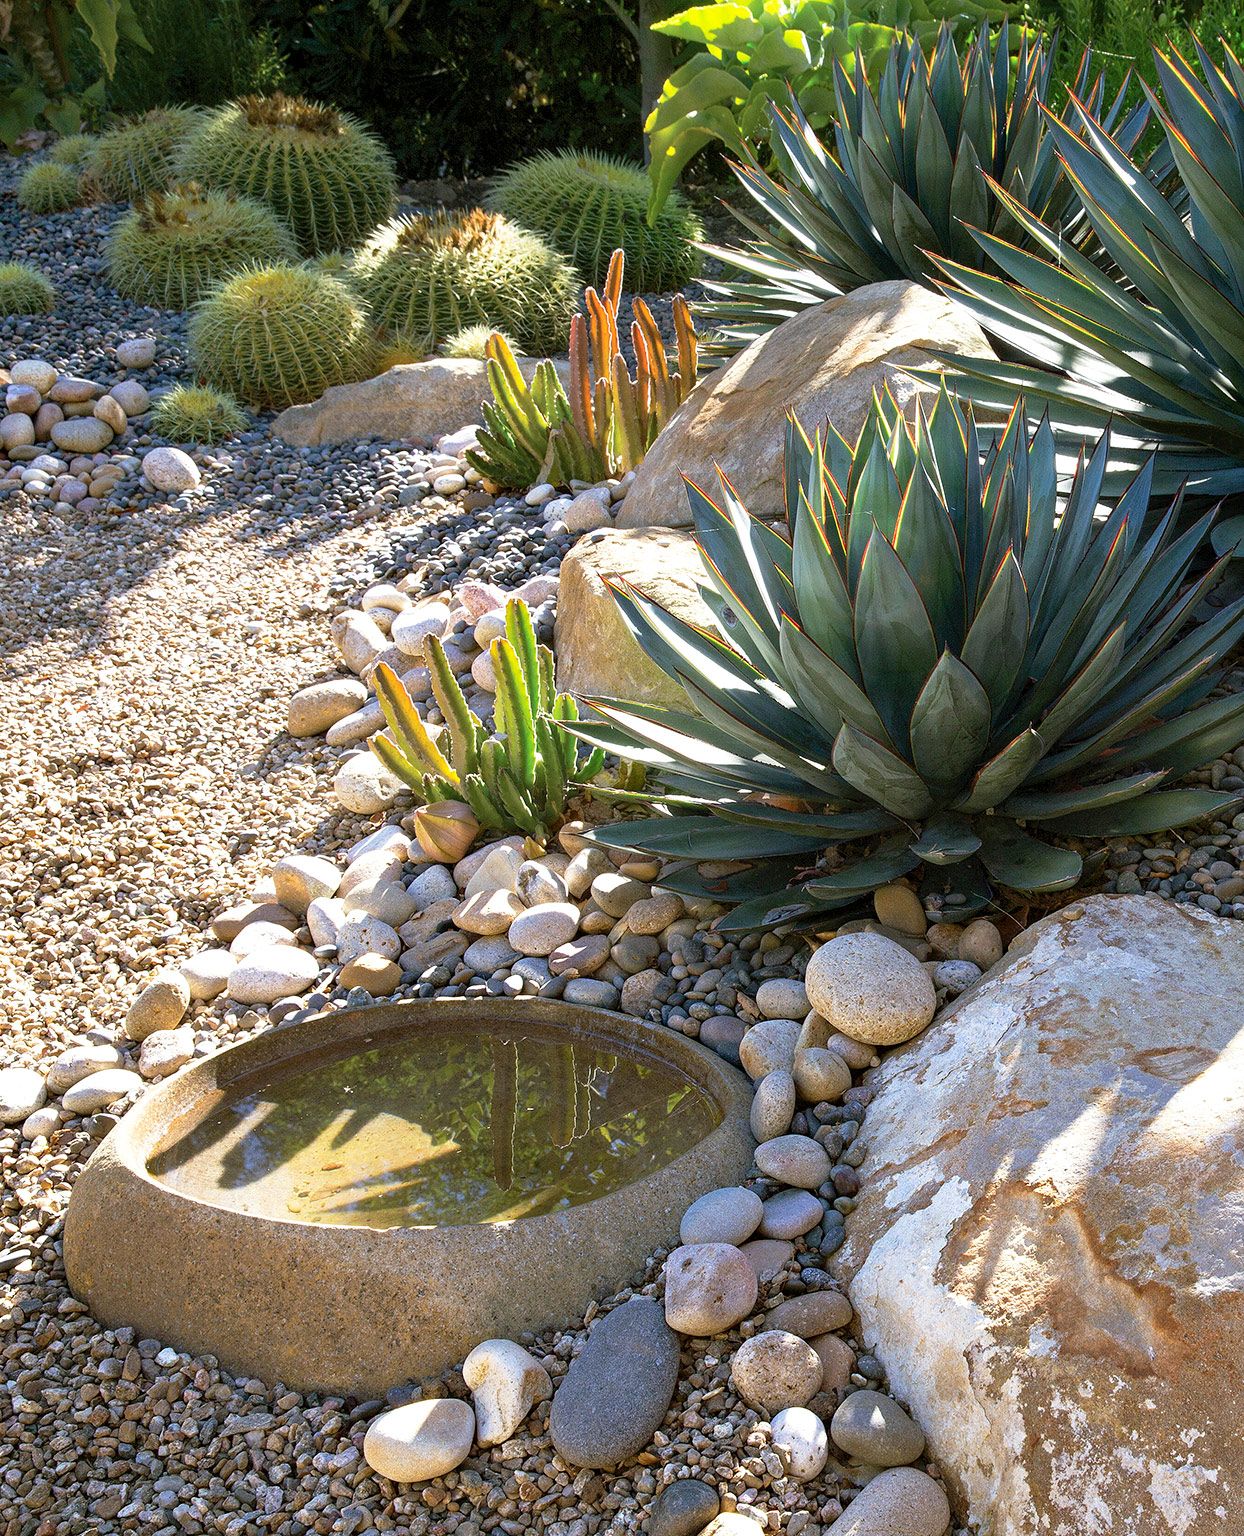 Transform Your Backyard with Stunning Rock Landscaping